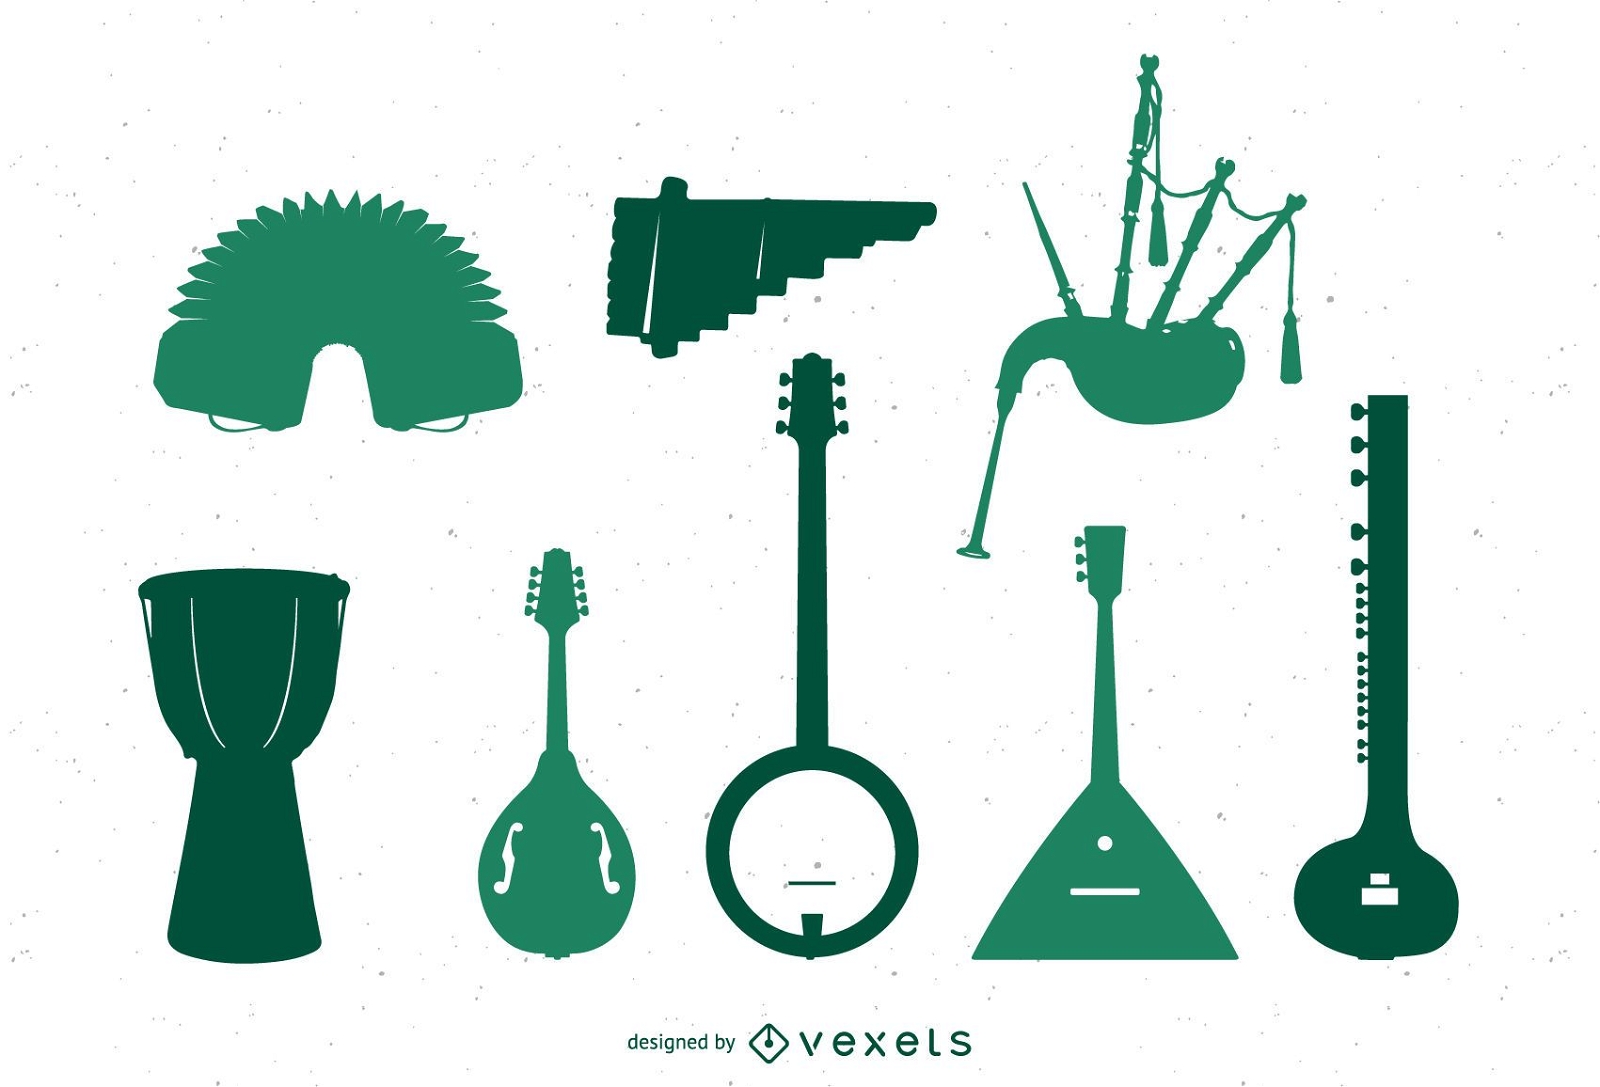 Misc music instruments of the world